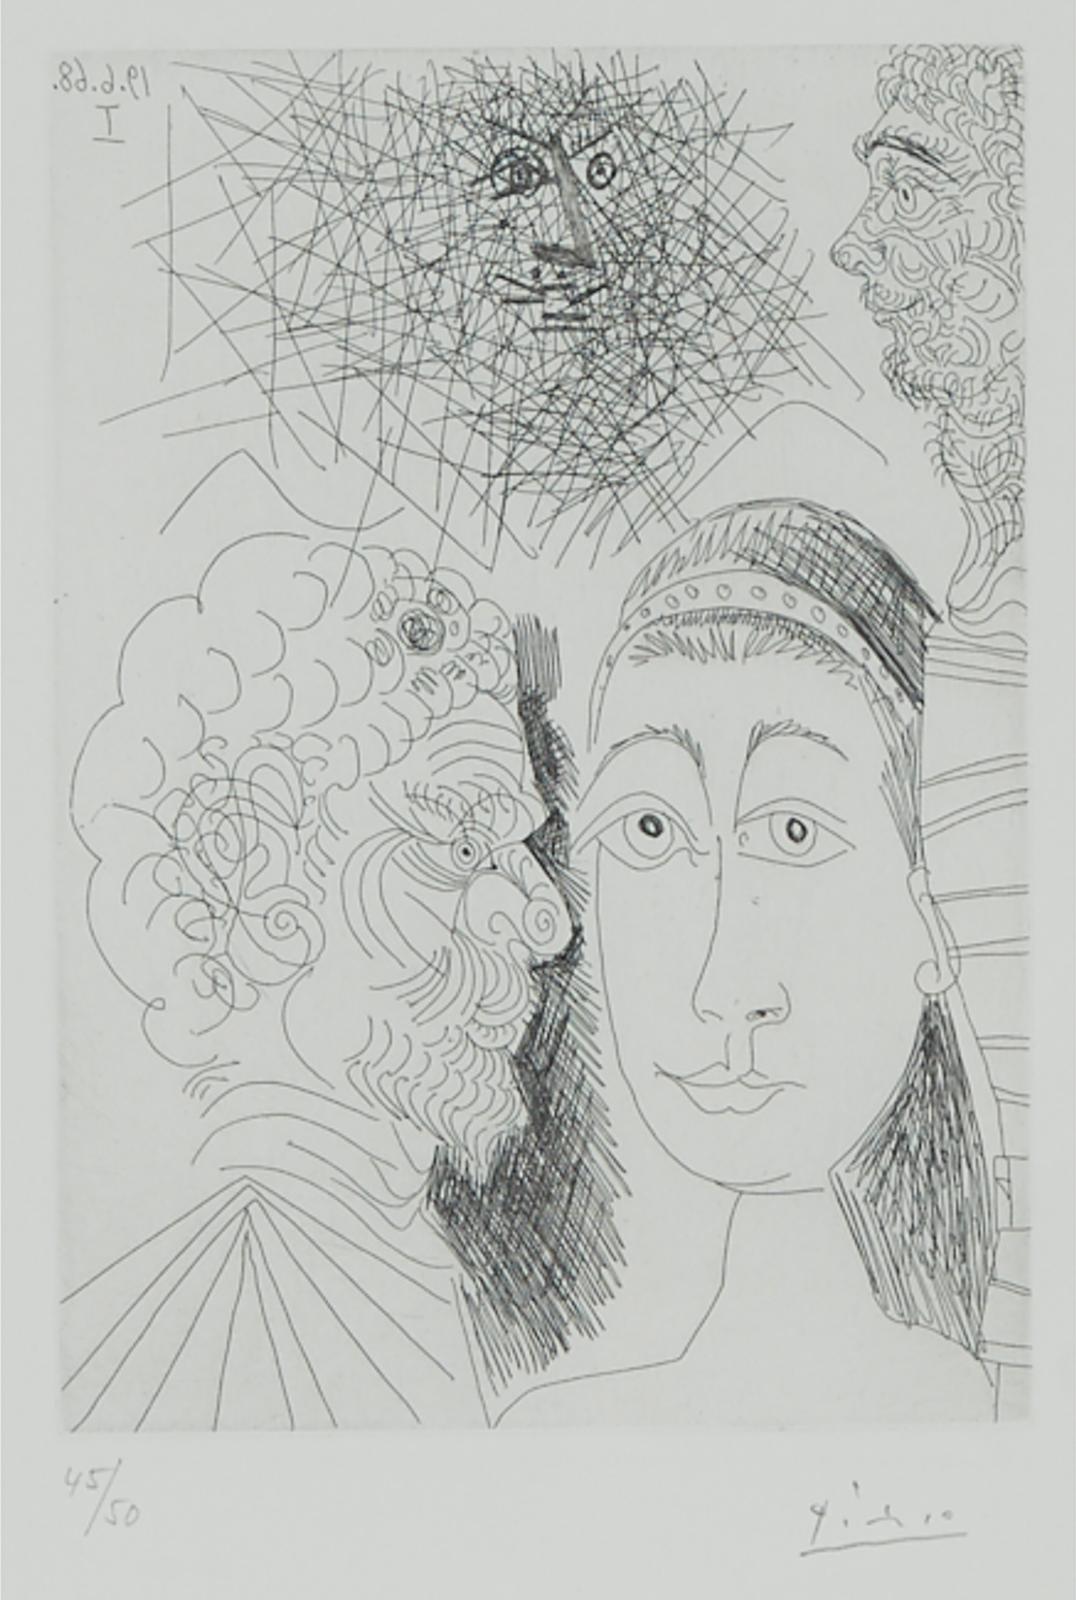 Pablo Ruiz Picasso (1881-1973) - FROM SUITE 347, PLATE 163, 1968 [BLOCH, 163; BAER 1659]